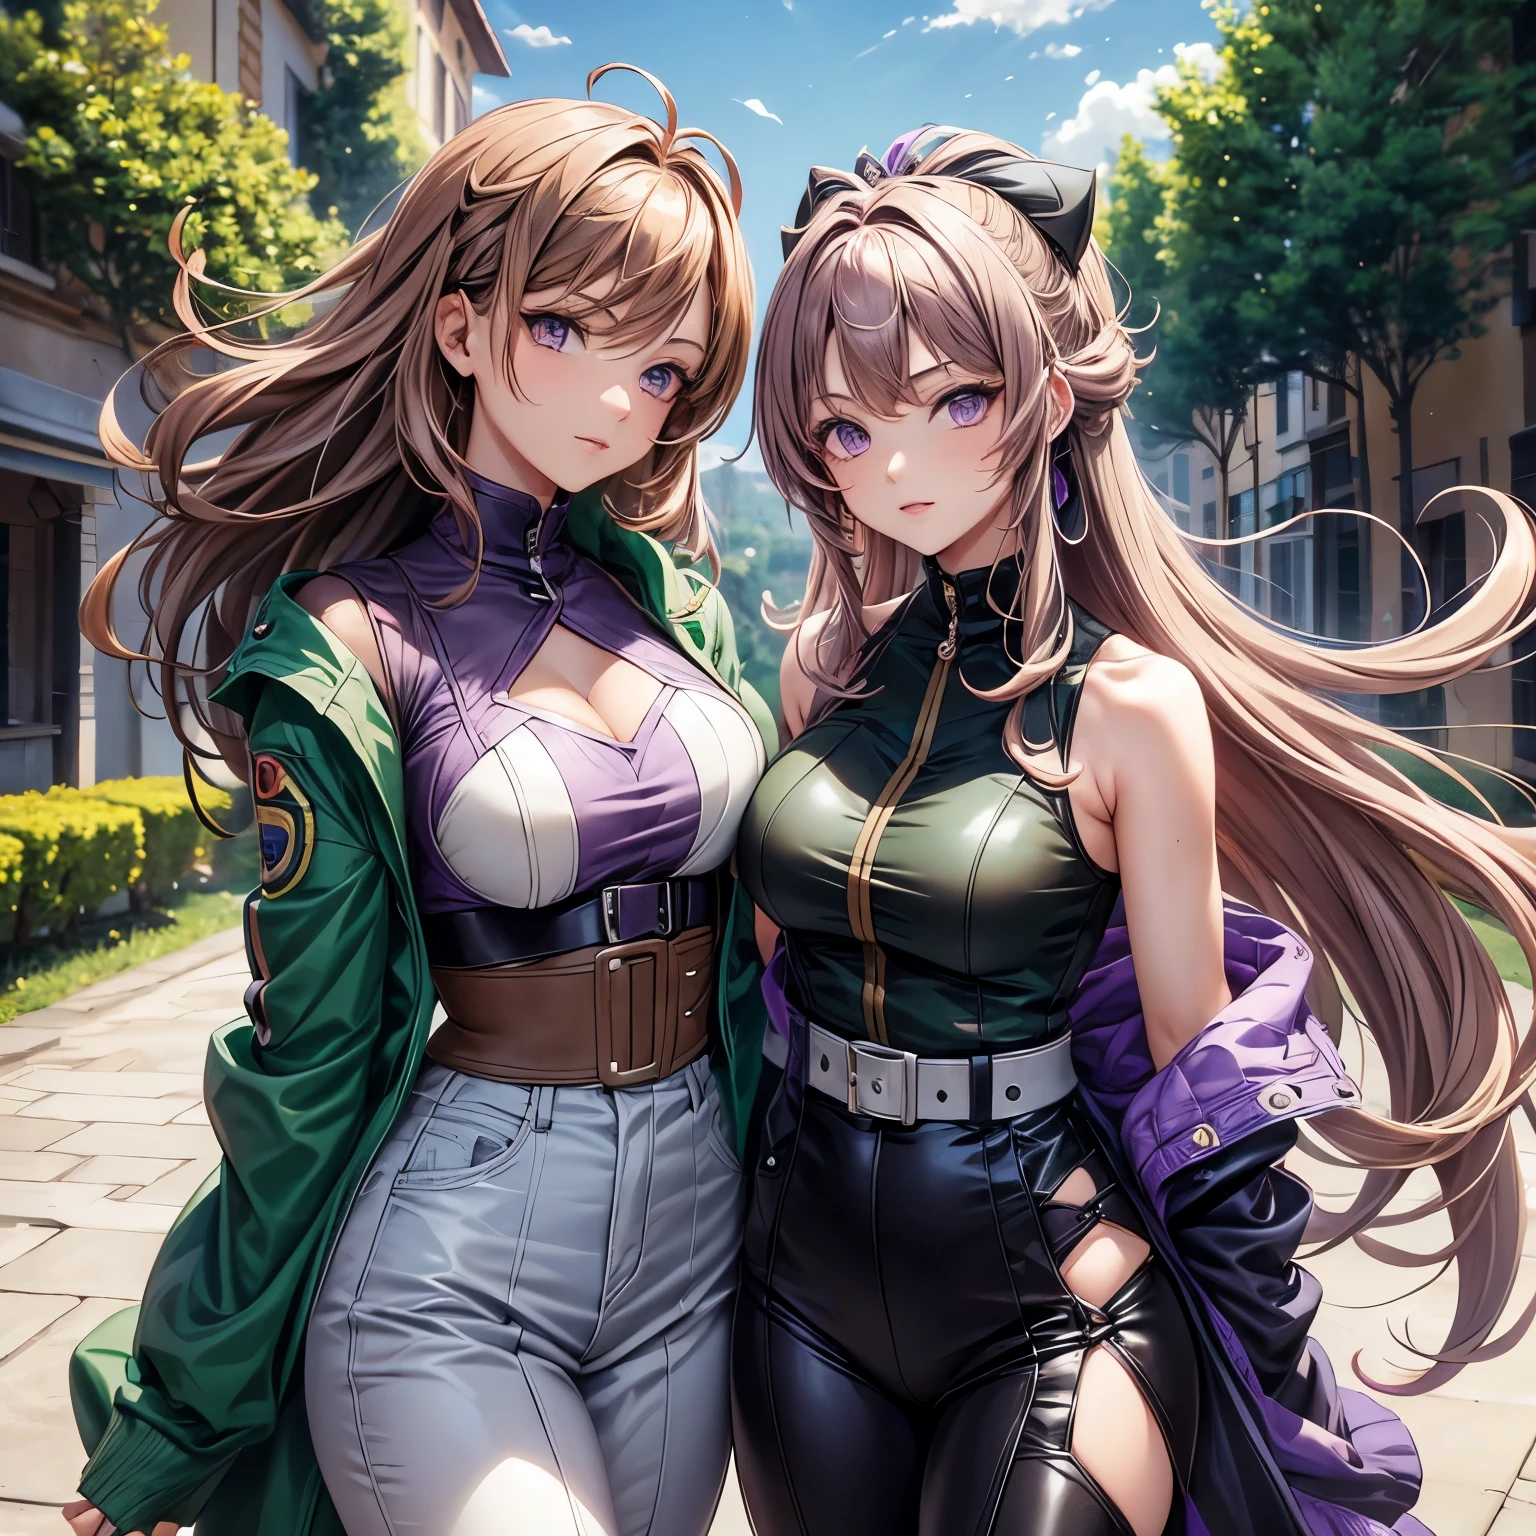 italian girl anime version (Control the power of the wind, Purple eyes and light brown medium hair, Italian green and black sleeveless clothes and jackets)